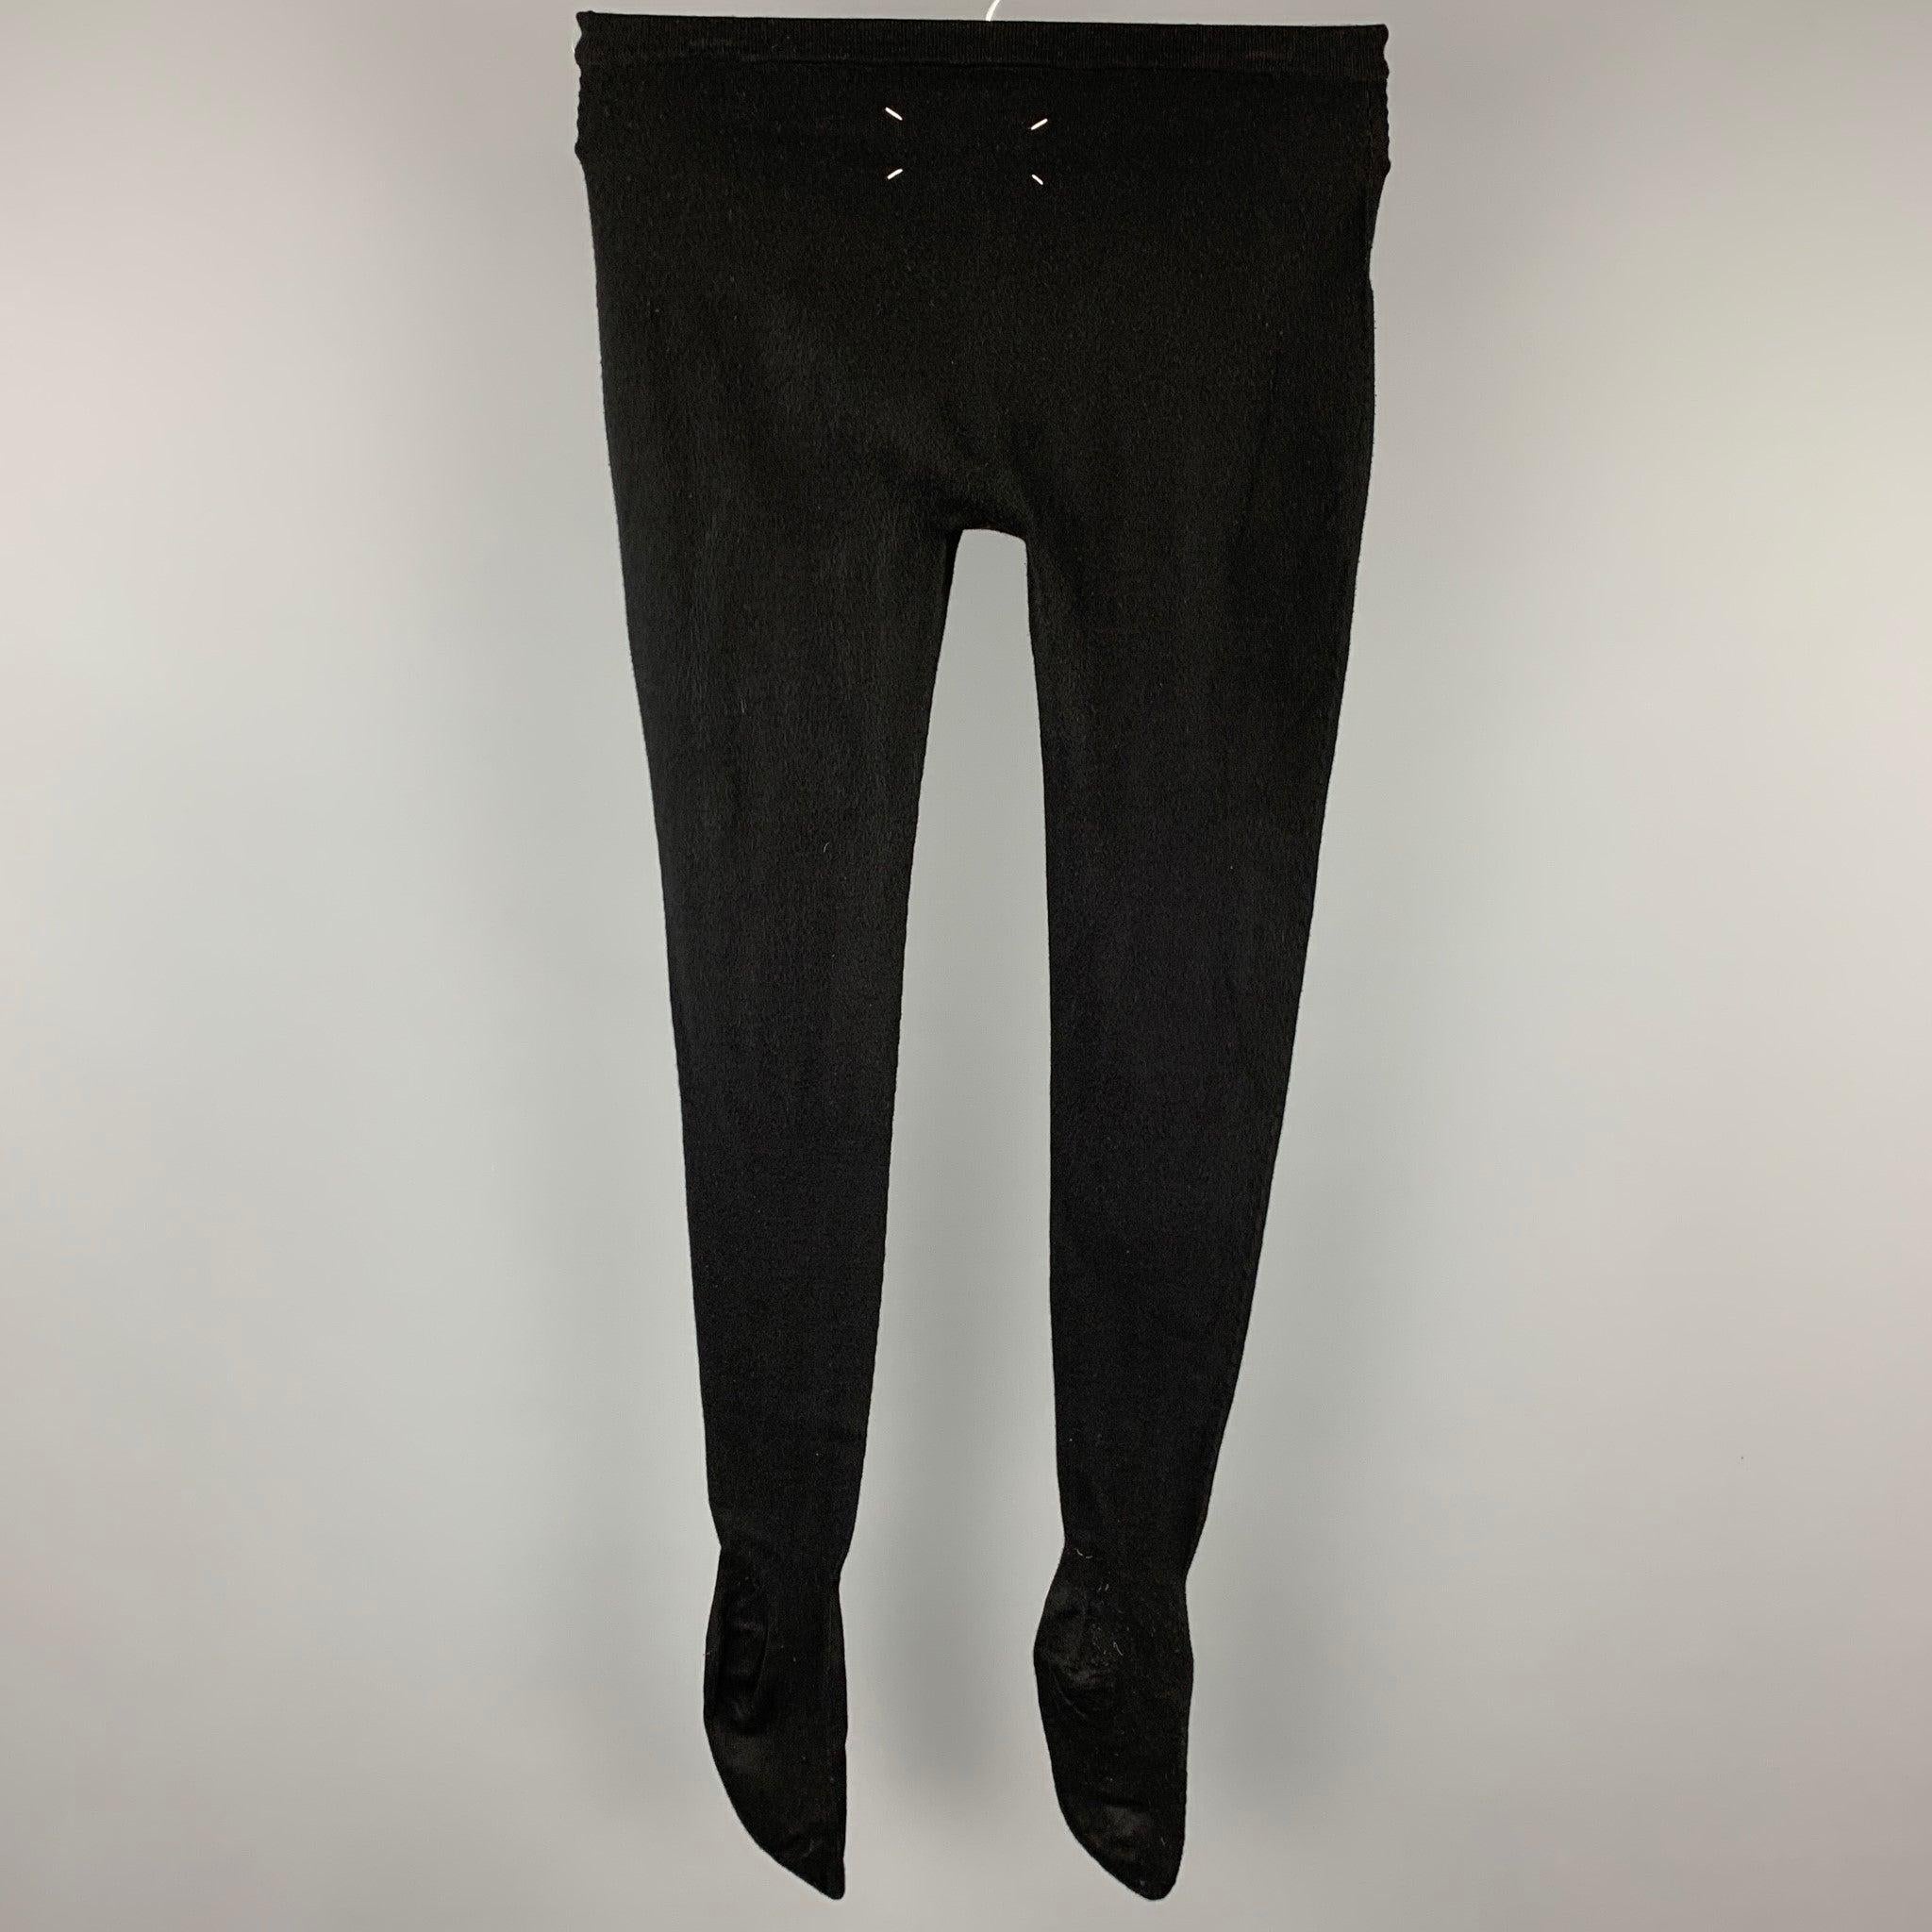 MAISON MARTIN MARGIELA leggings comes in a black viscose / polyester and features a feet design. Made in Italy.
Very Good
Pre-Owned Condition. 

Marked:   M 

Measurements: 
  Waist: 24 inches  Inseam: 36 inches  / Measured with feet.
  
  
